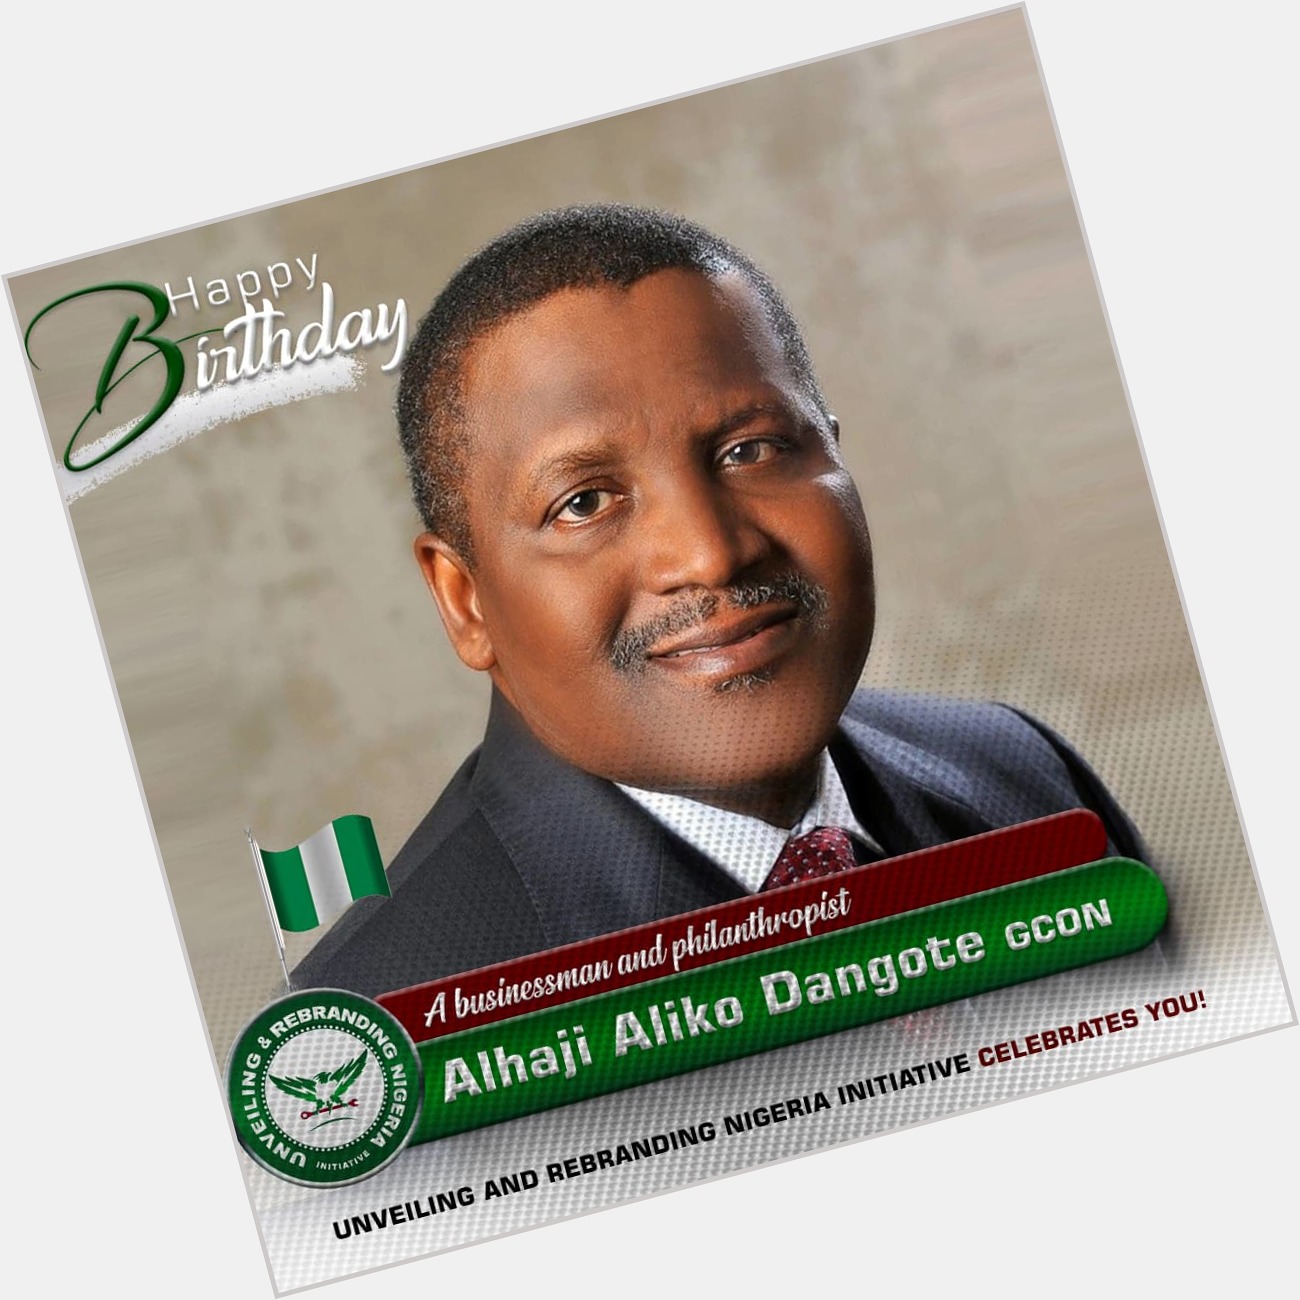 Happy birthday to a national icon, business leader, and foremost philanthropist, Alhaji Aliko Dangote. 